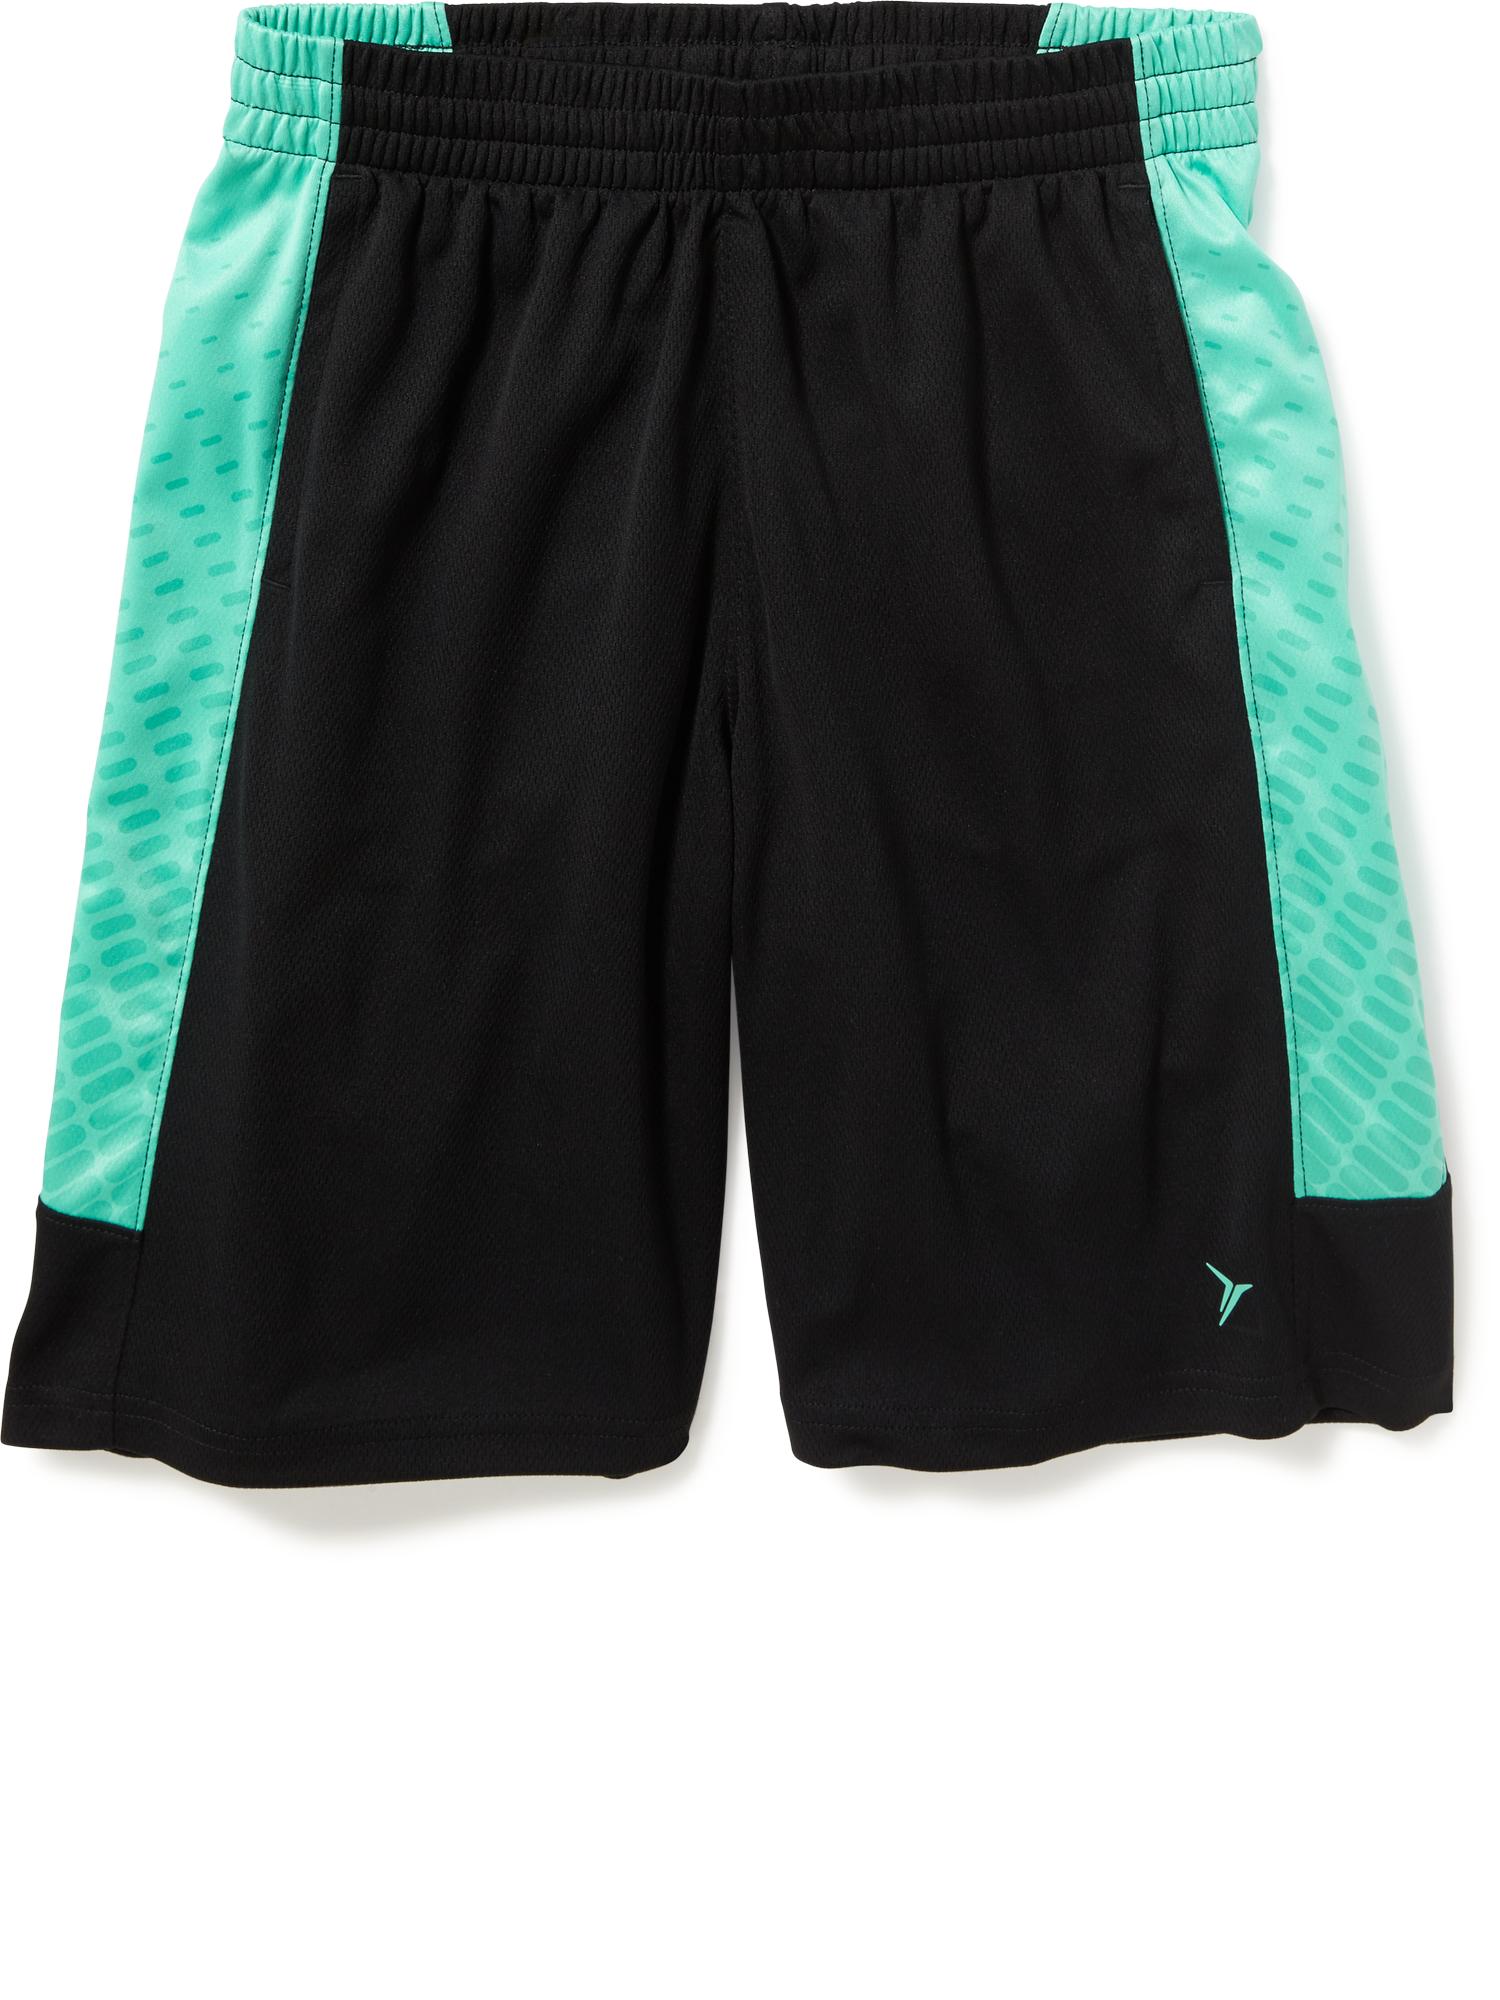 Go-Dry Cool Basketball Shorts For Boys | Old Navy